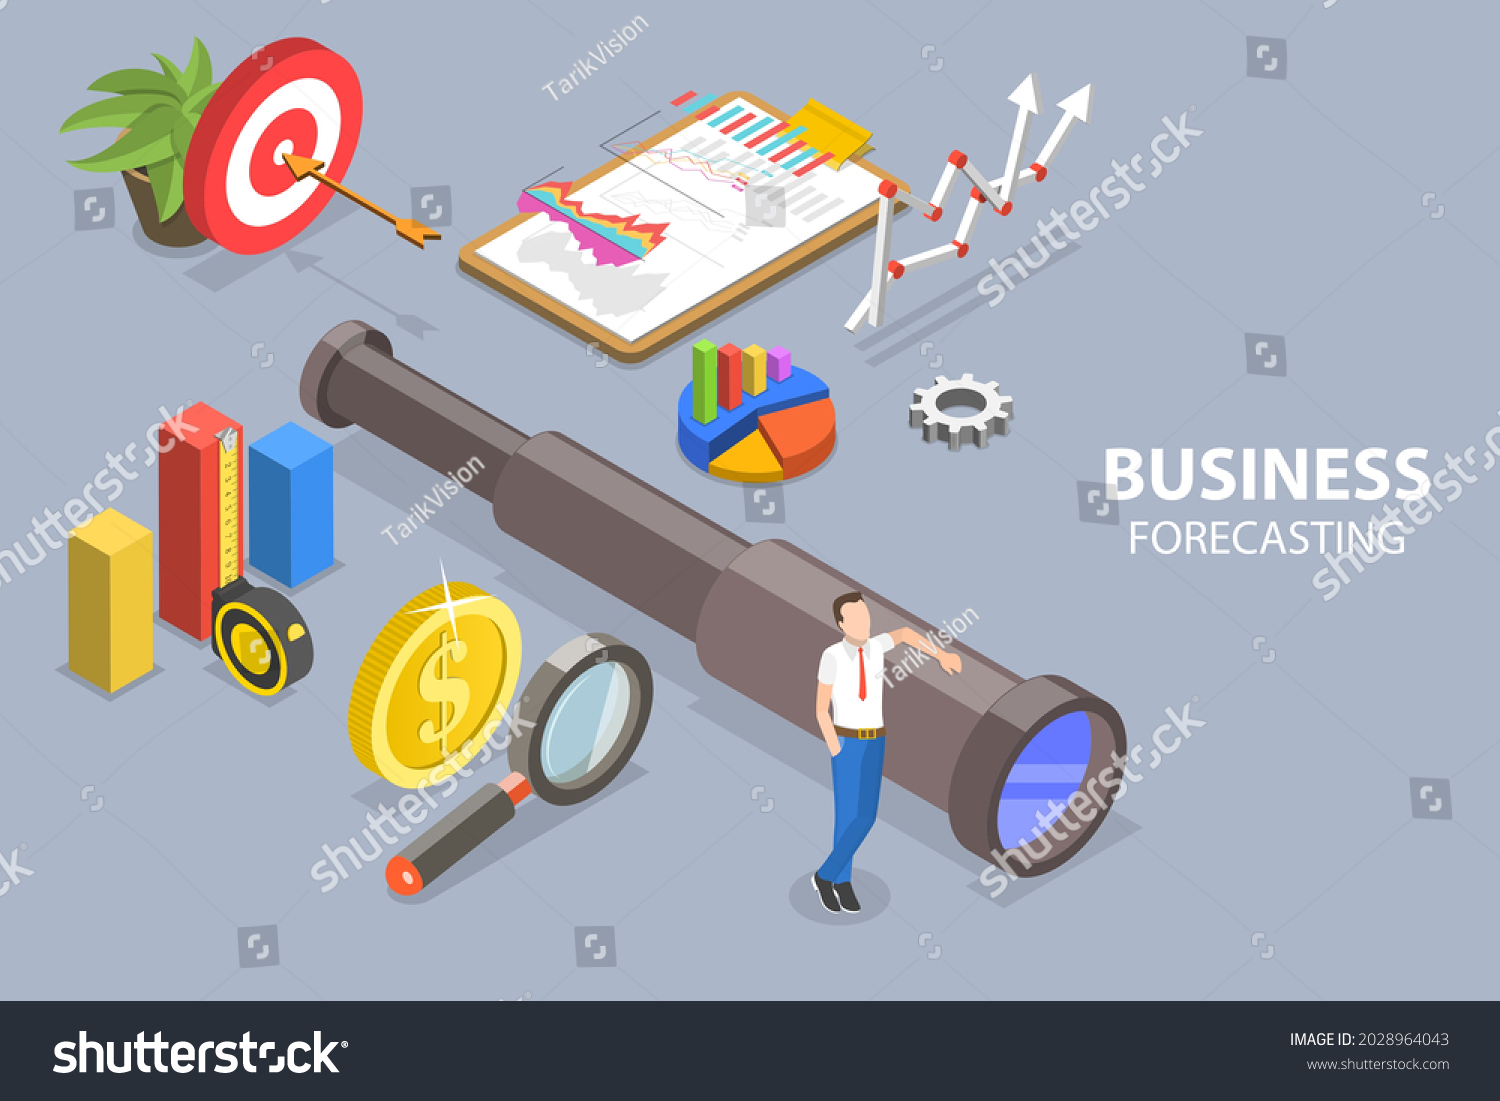 SVG of 3D Isometric Flat Vector Conceptual Illustration of Business Forecasting, Searching for Business Opportunities svg